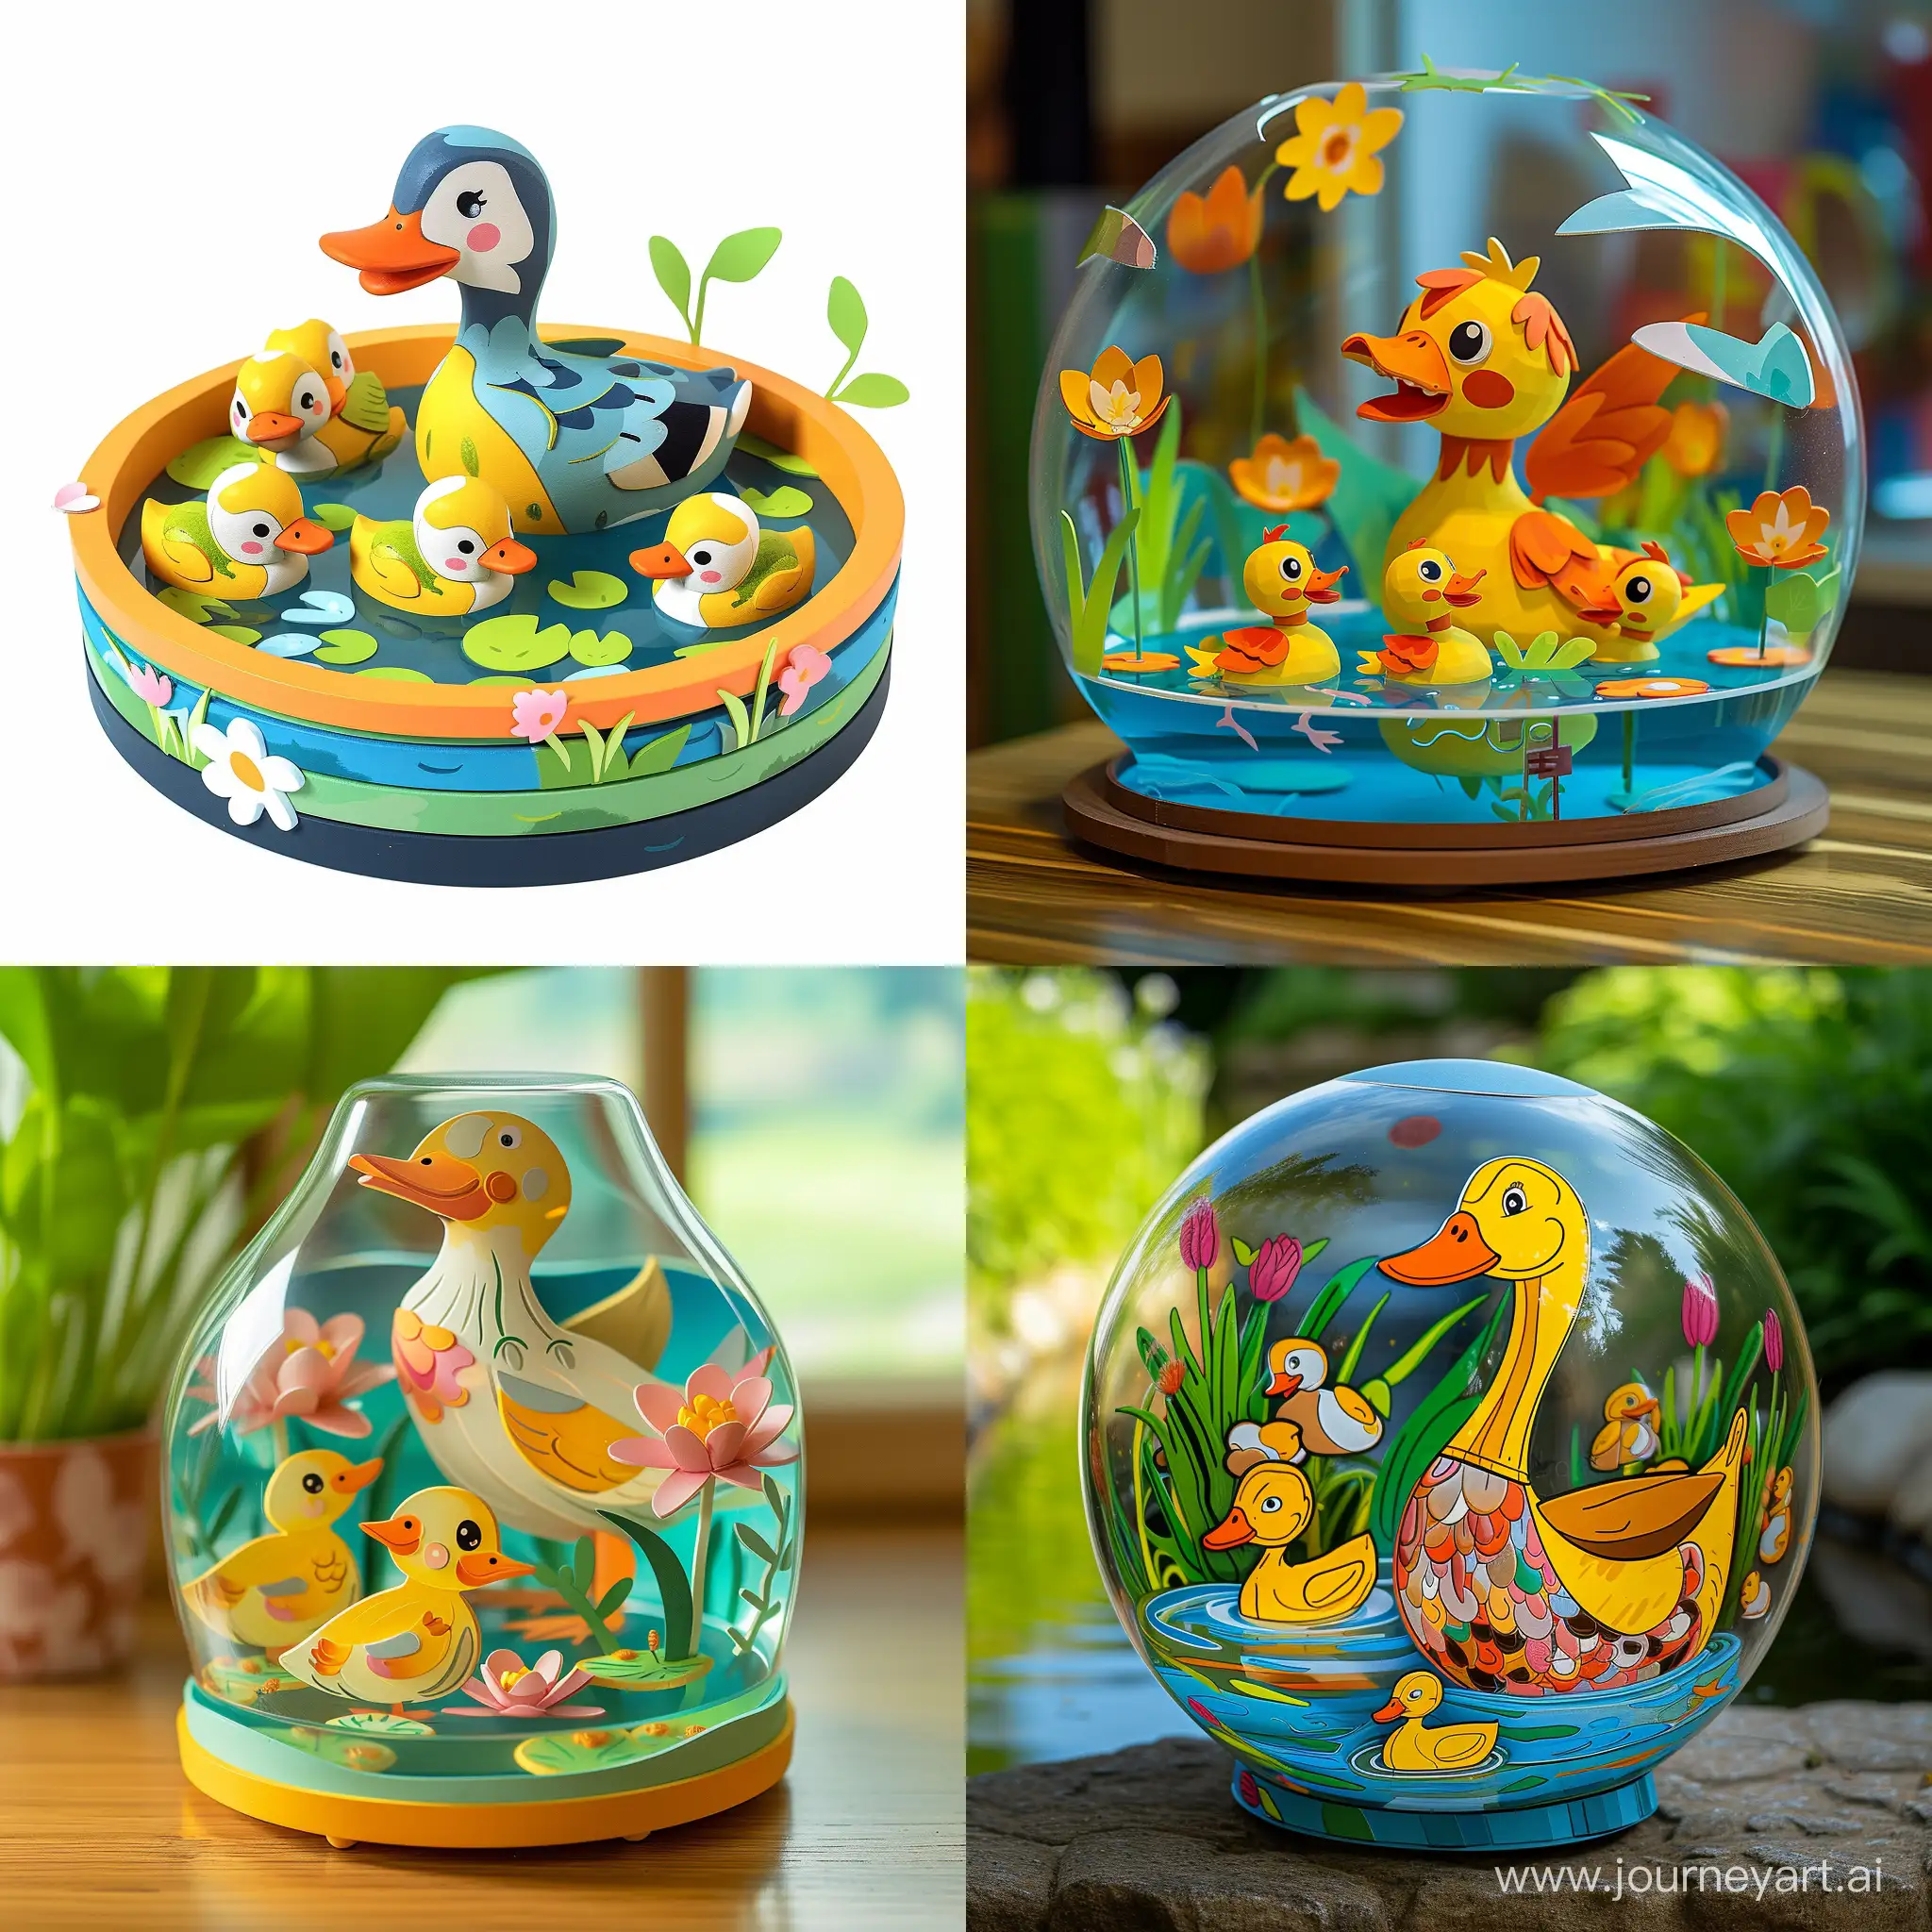 A four-dimensional image with cartoon features suitable for children of a water pond inside which there is a mother duck with her children in bright colors.